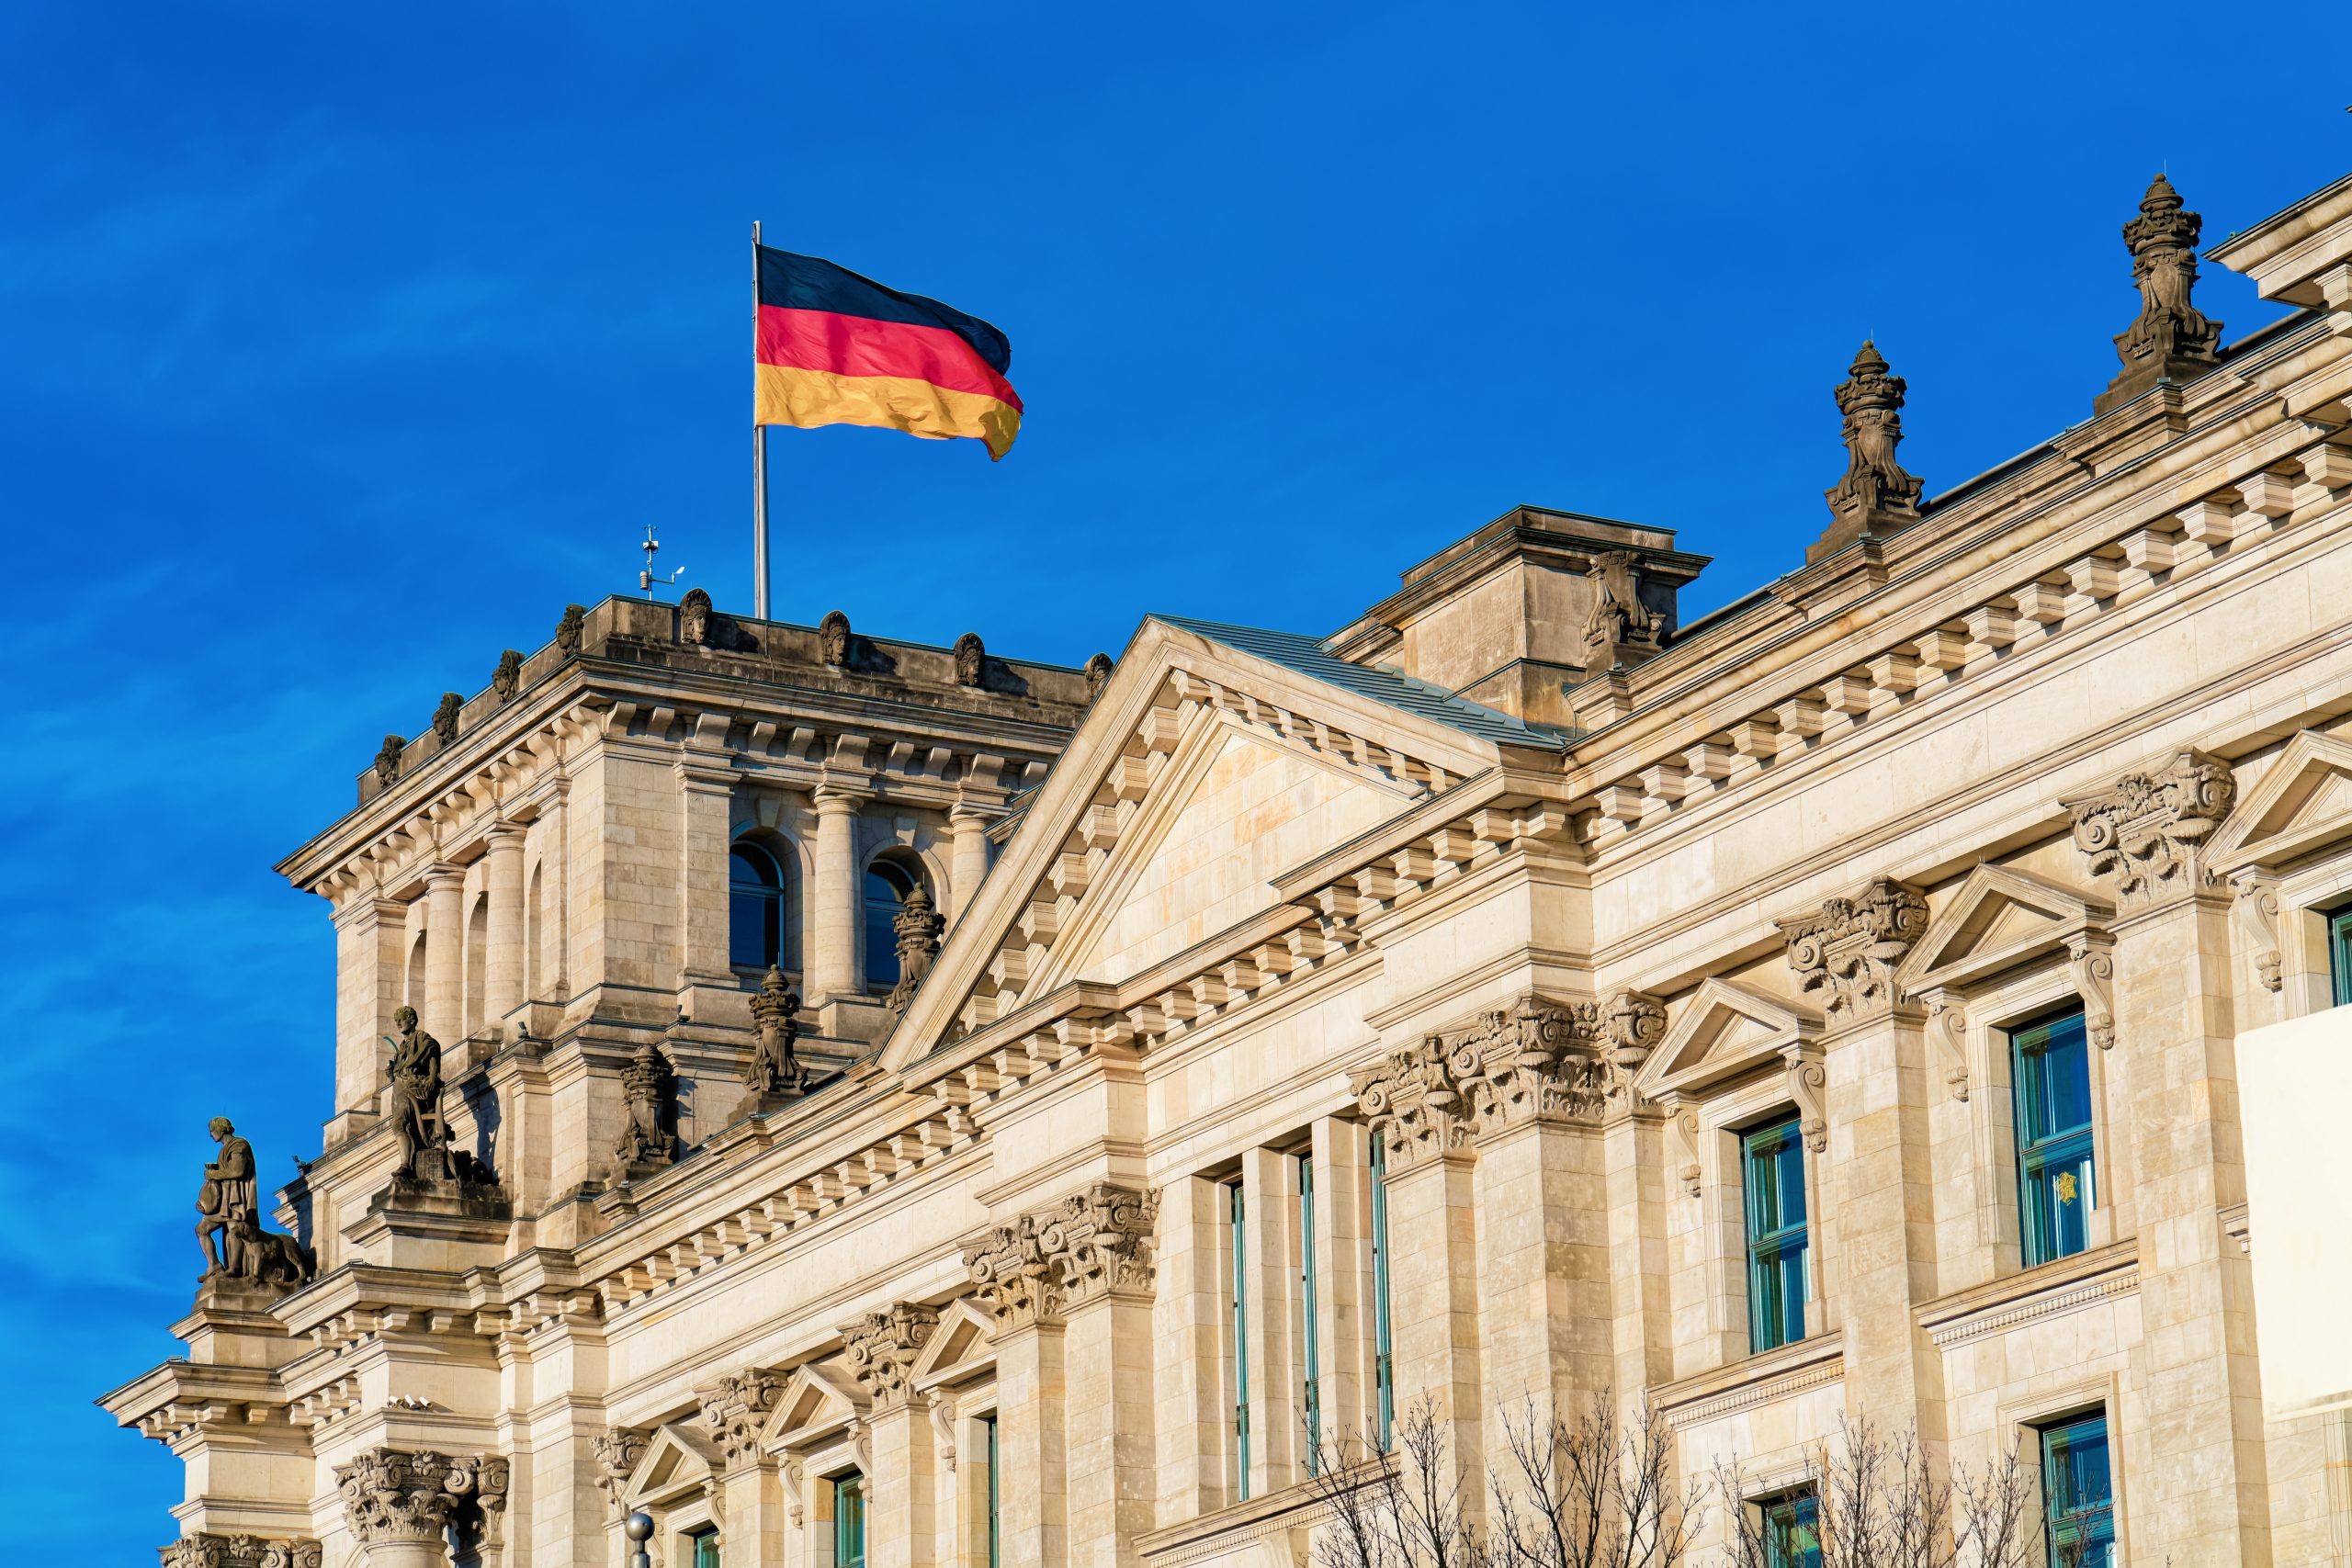 Reichstag building architecture with German Flag in Berlin city center, capital of Germany in winter in the street. German Bundestag parliament house.